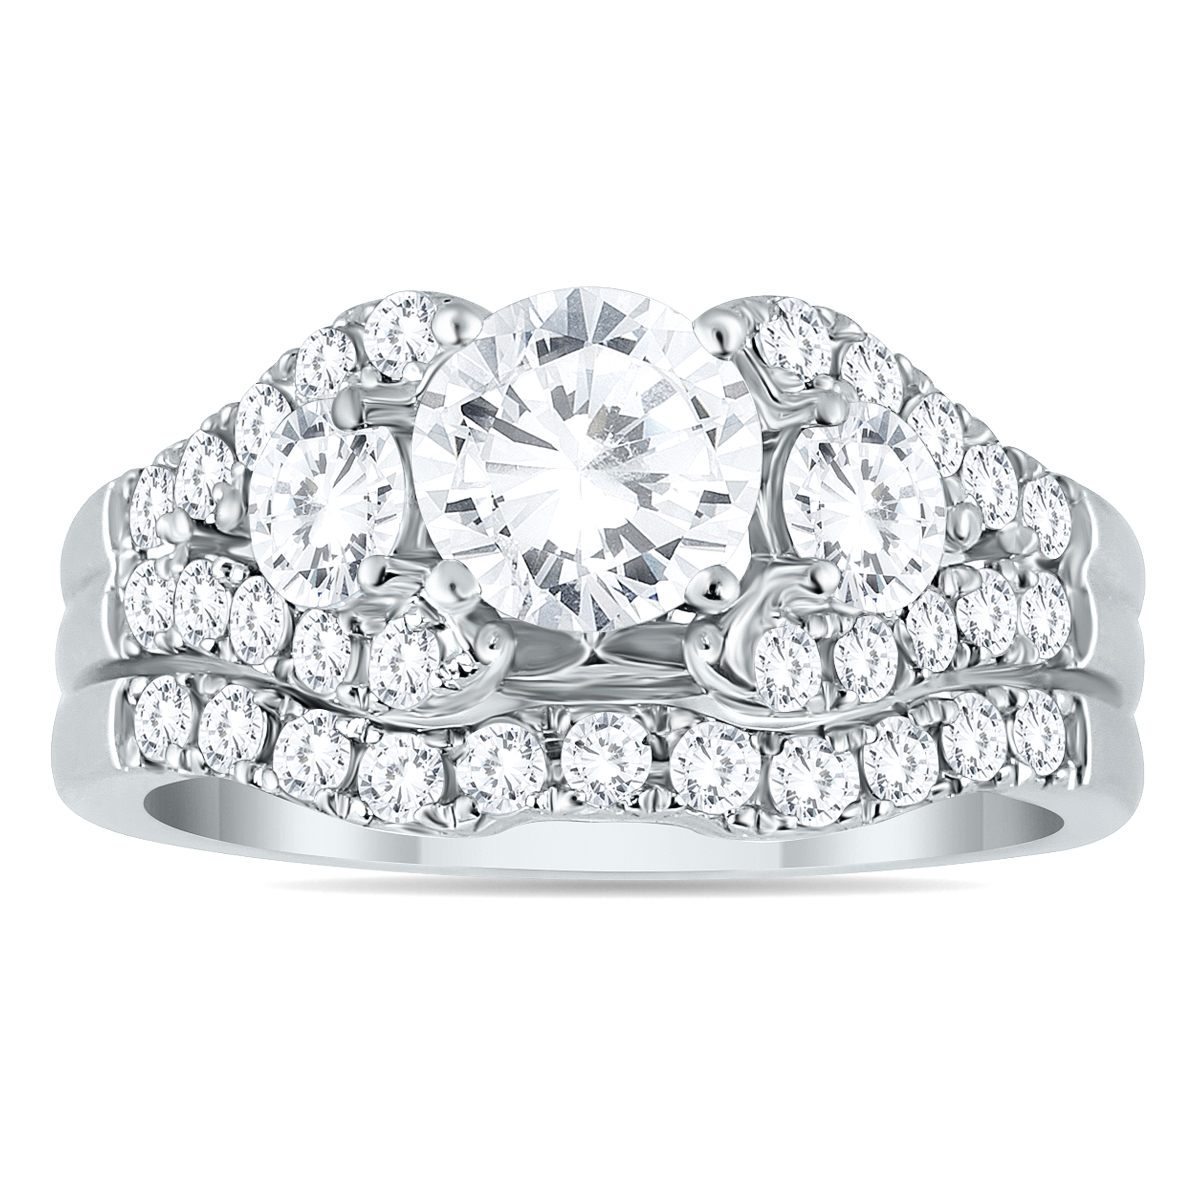 Image of AGS Certified 2 1/5 Carat TW Diamond Bridal Set in 14K White Gold (J-K Color I2-I3 Clarity)